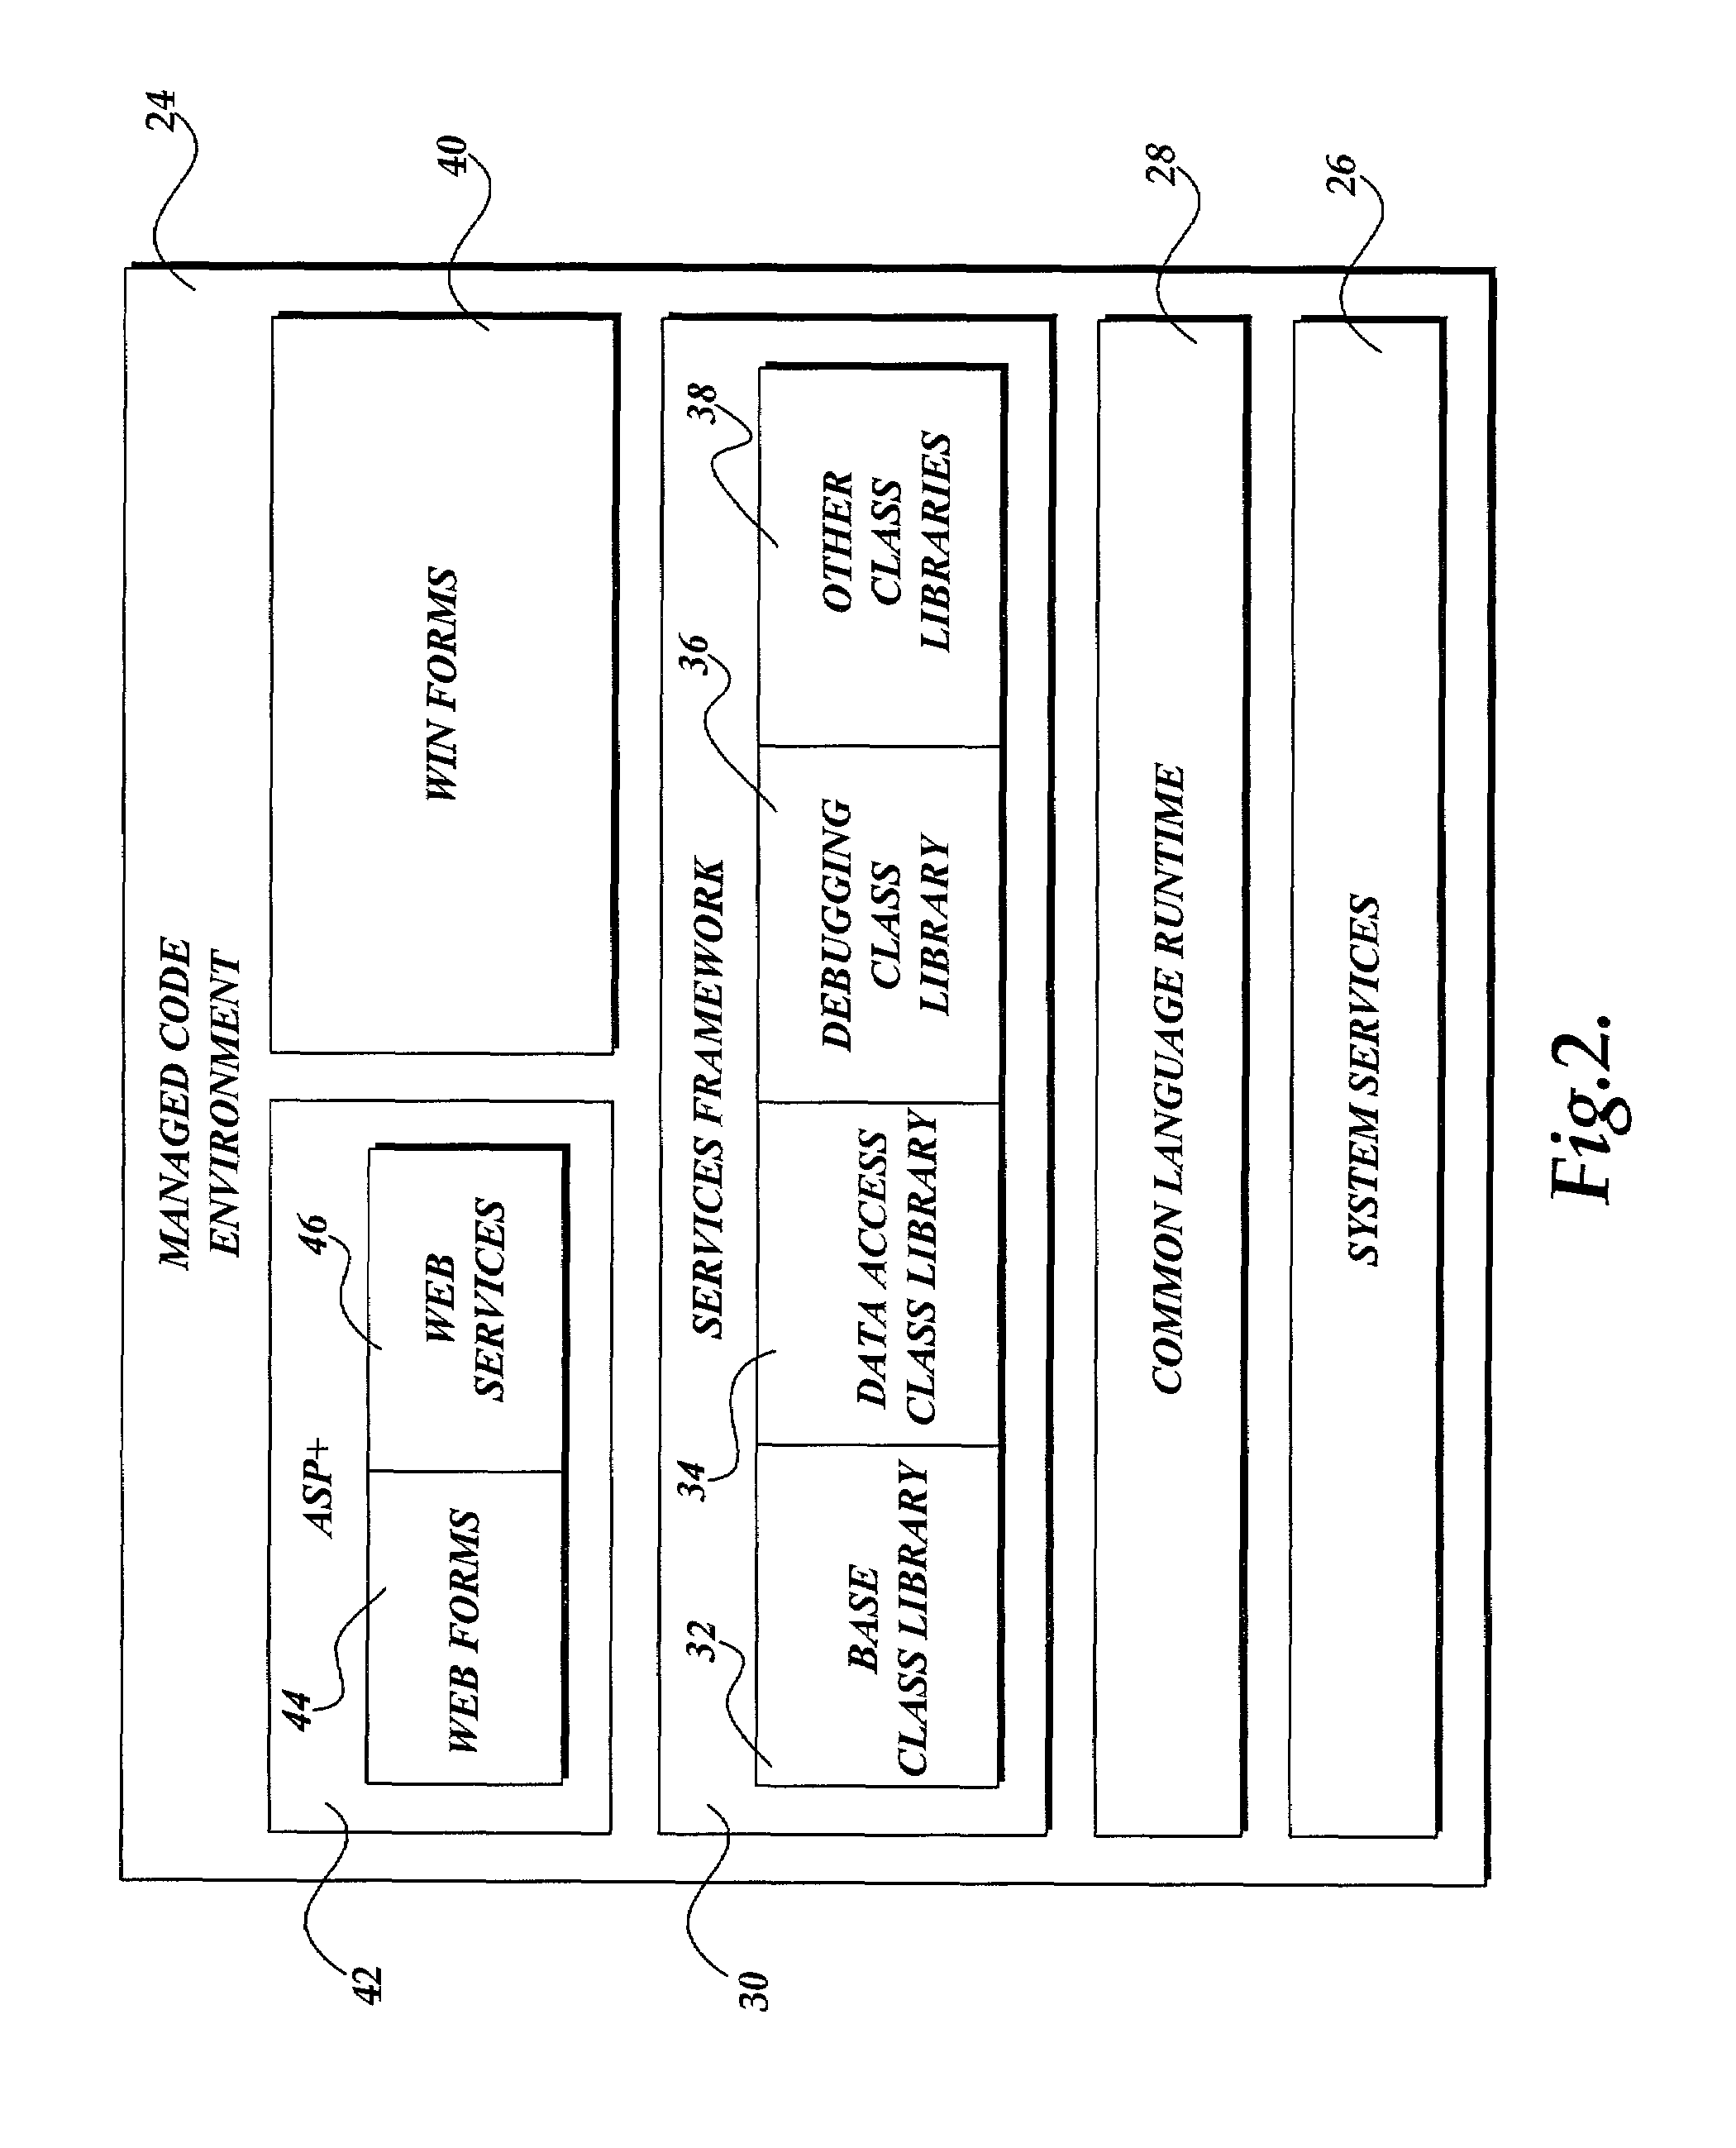 Method and apparatus for accessing instrumentation data from within a managed code environment